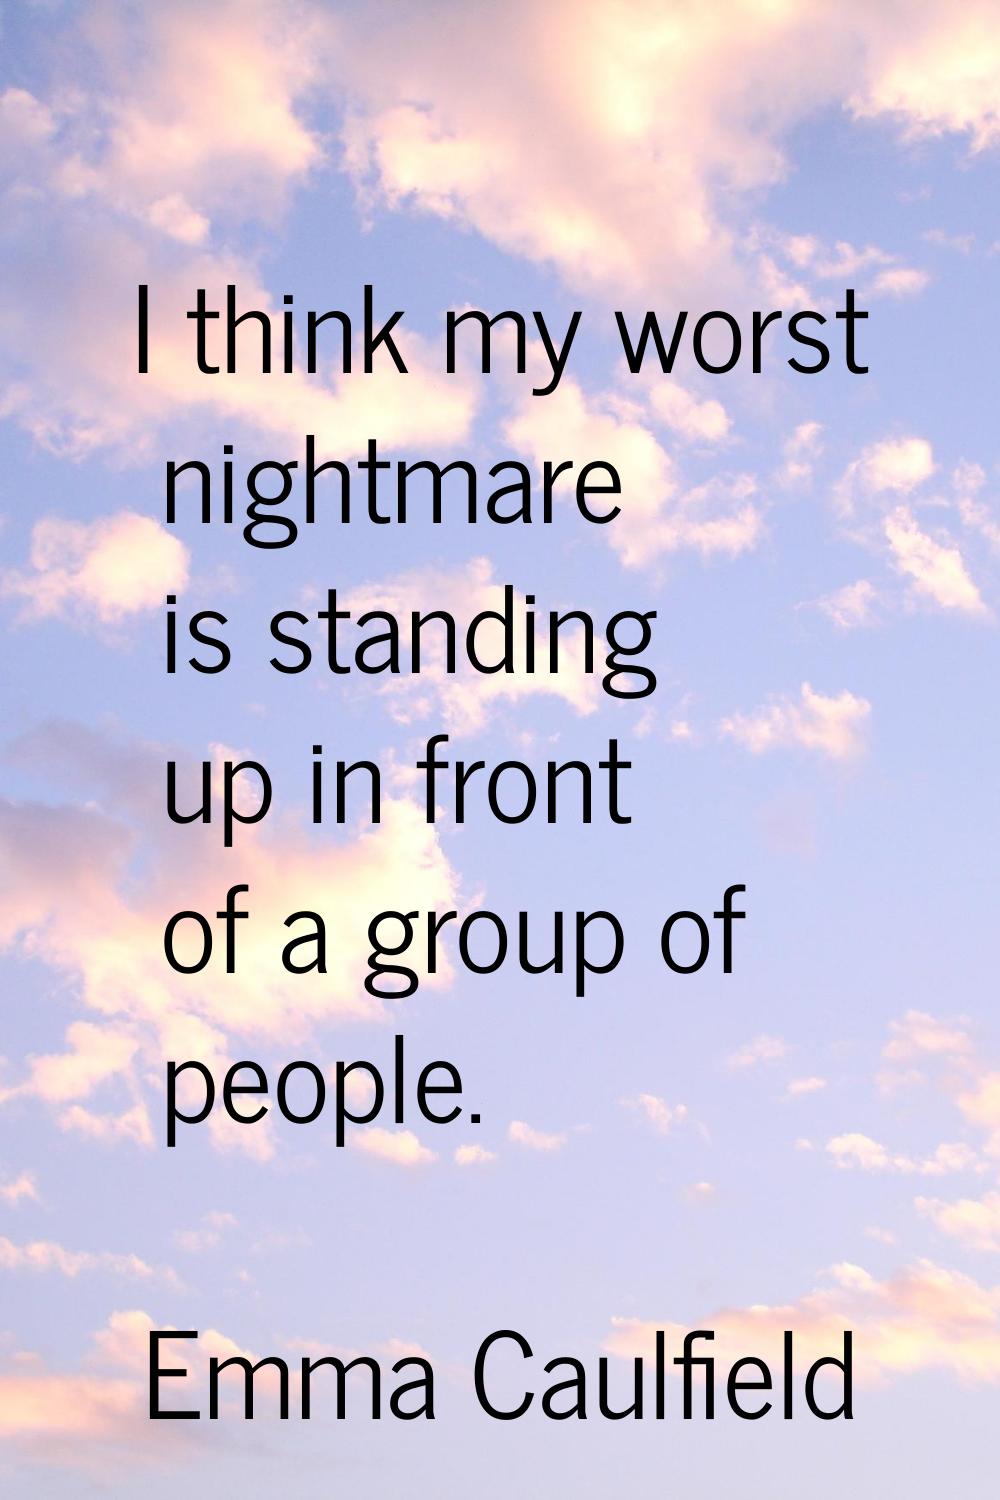 I think my worst nightmare is standing up in front of a group of people.